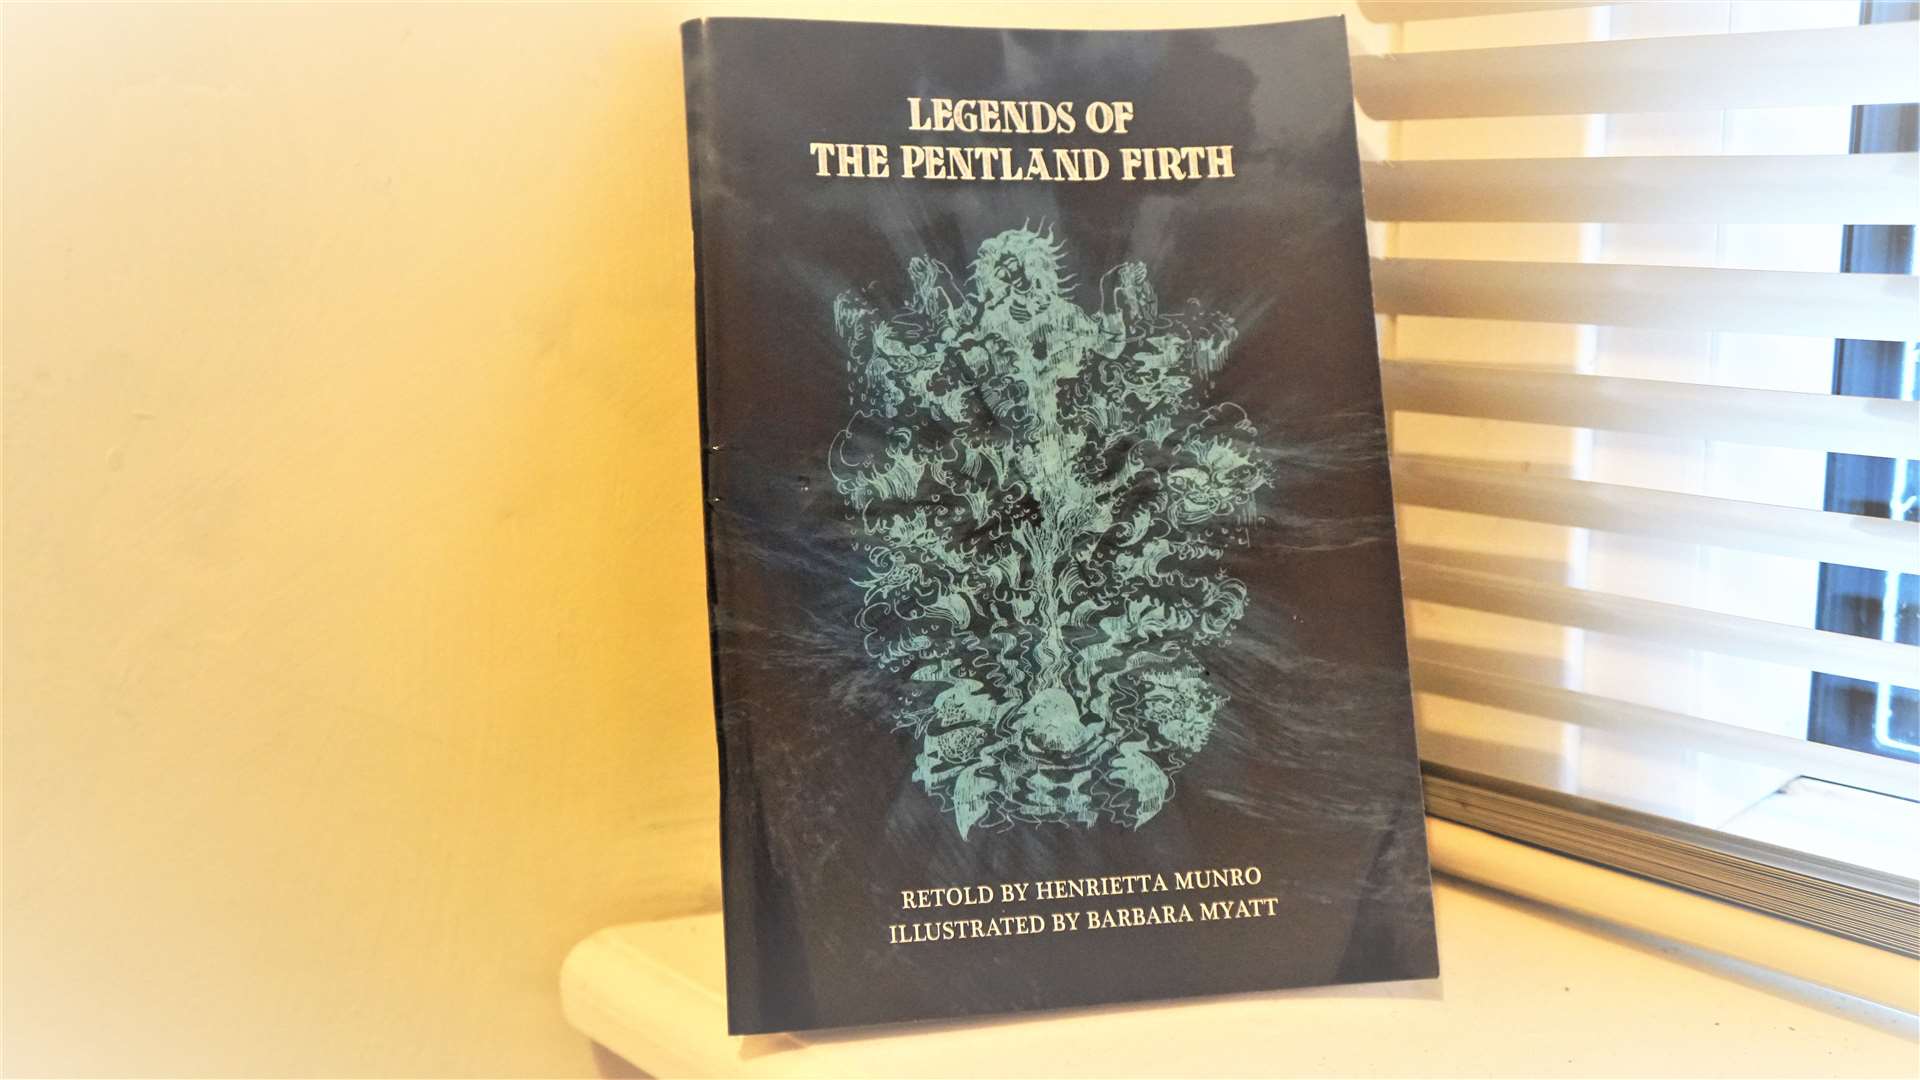 Legends of the Pentland Firth by Hettie Munro with illustrations by Barbara Myatt.